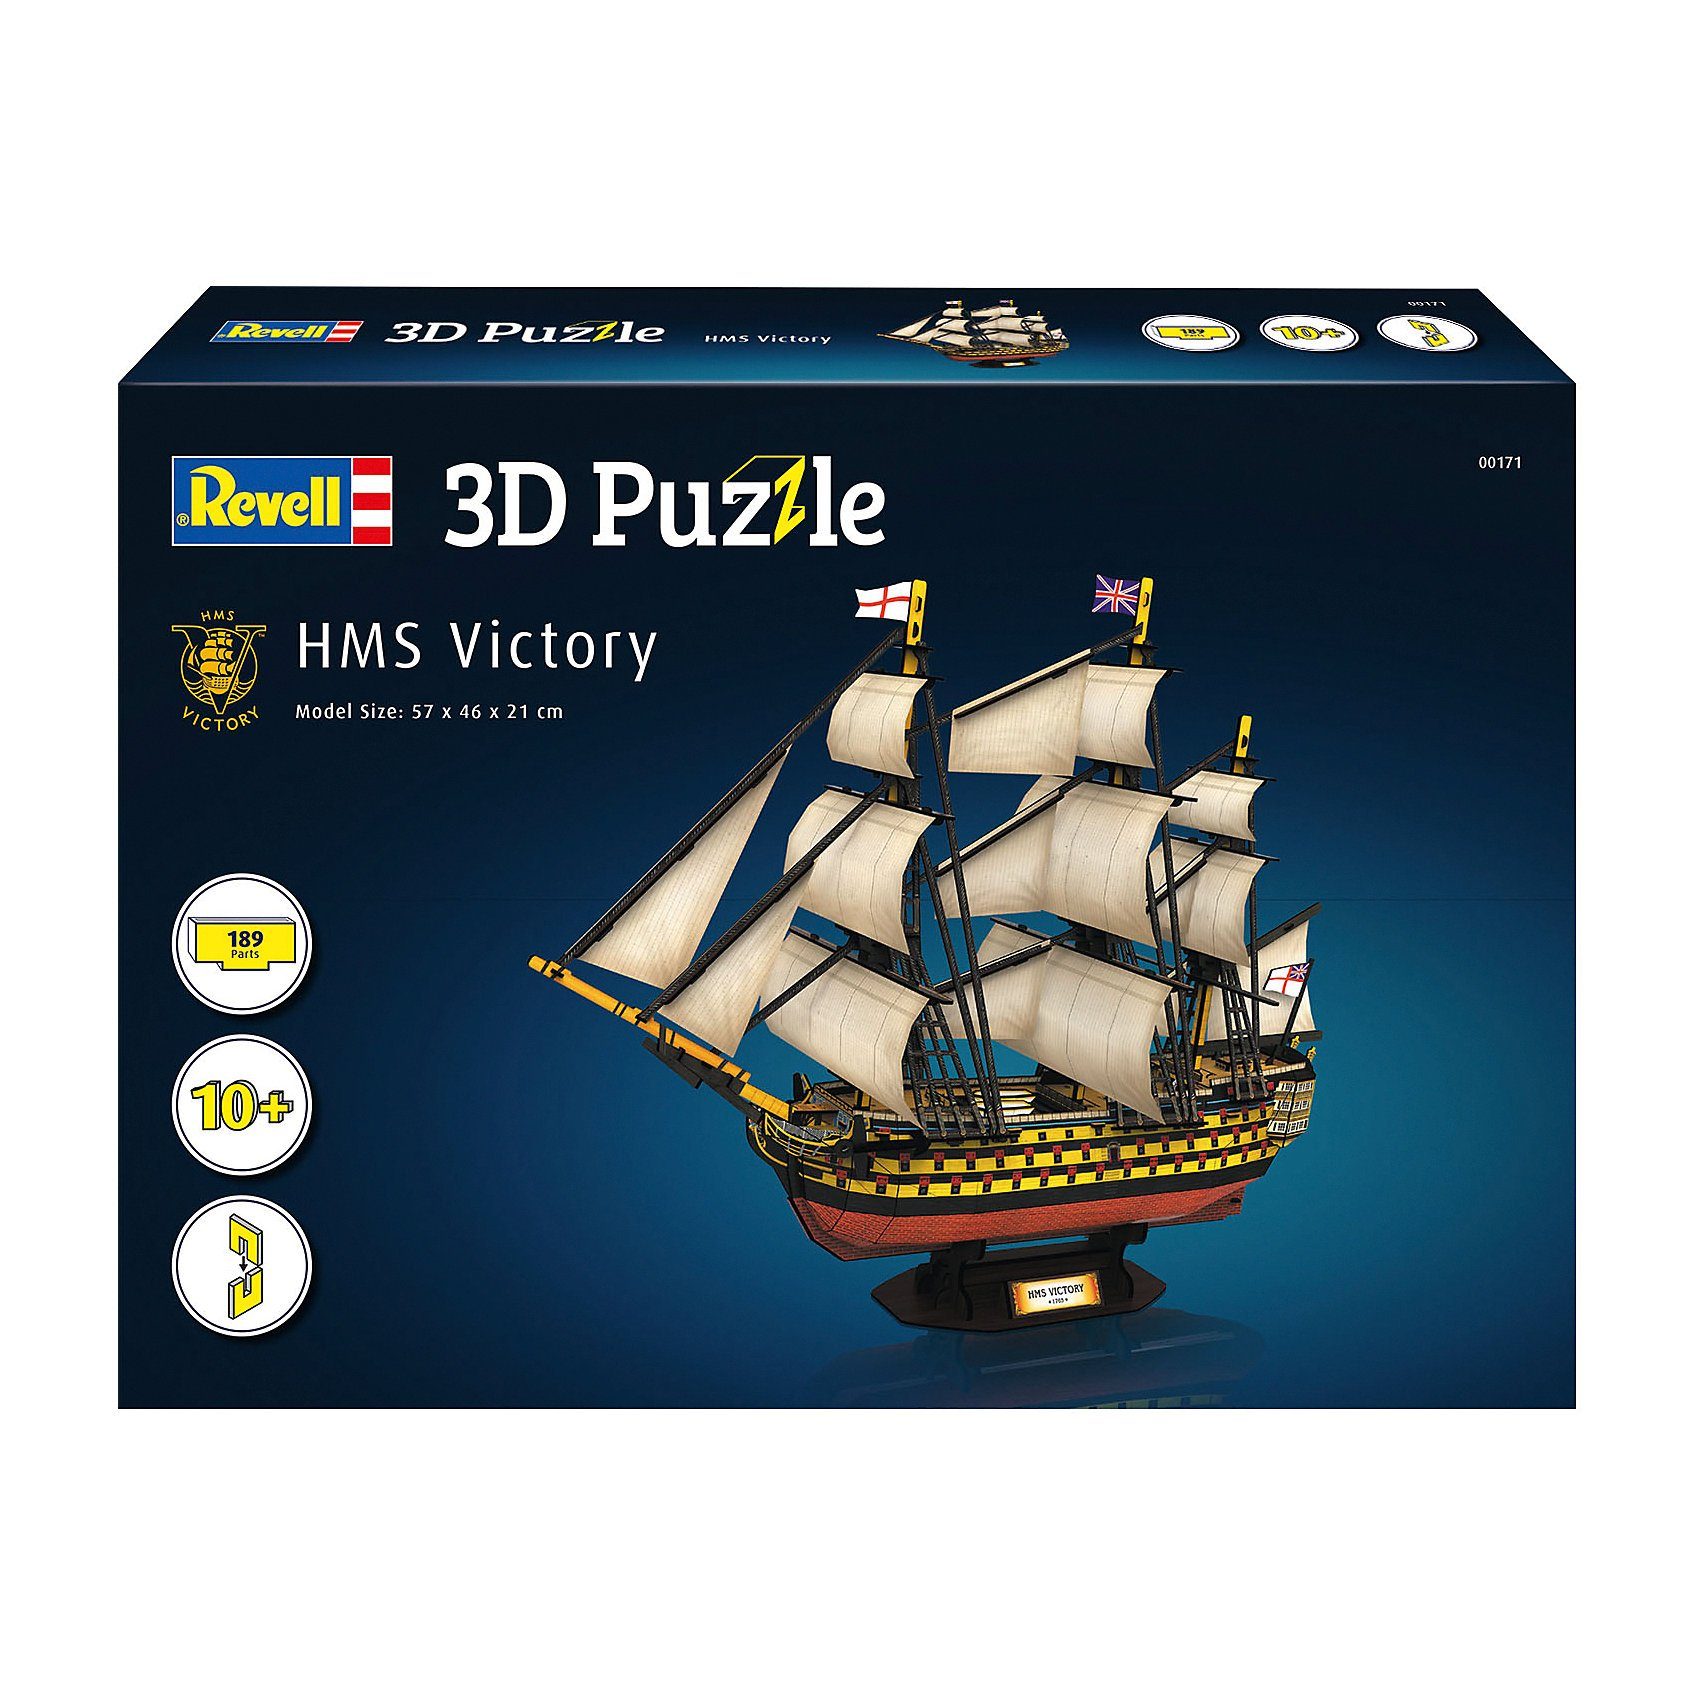 Revell® 3D-Puzzle HMS Victory, 189 Teile kaufen | OTTO